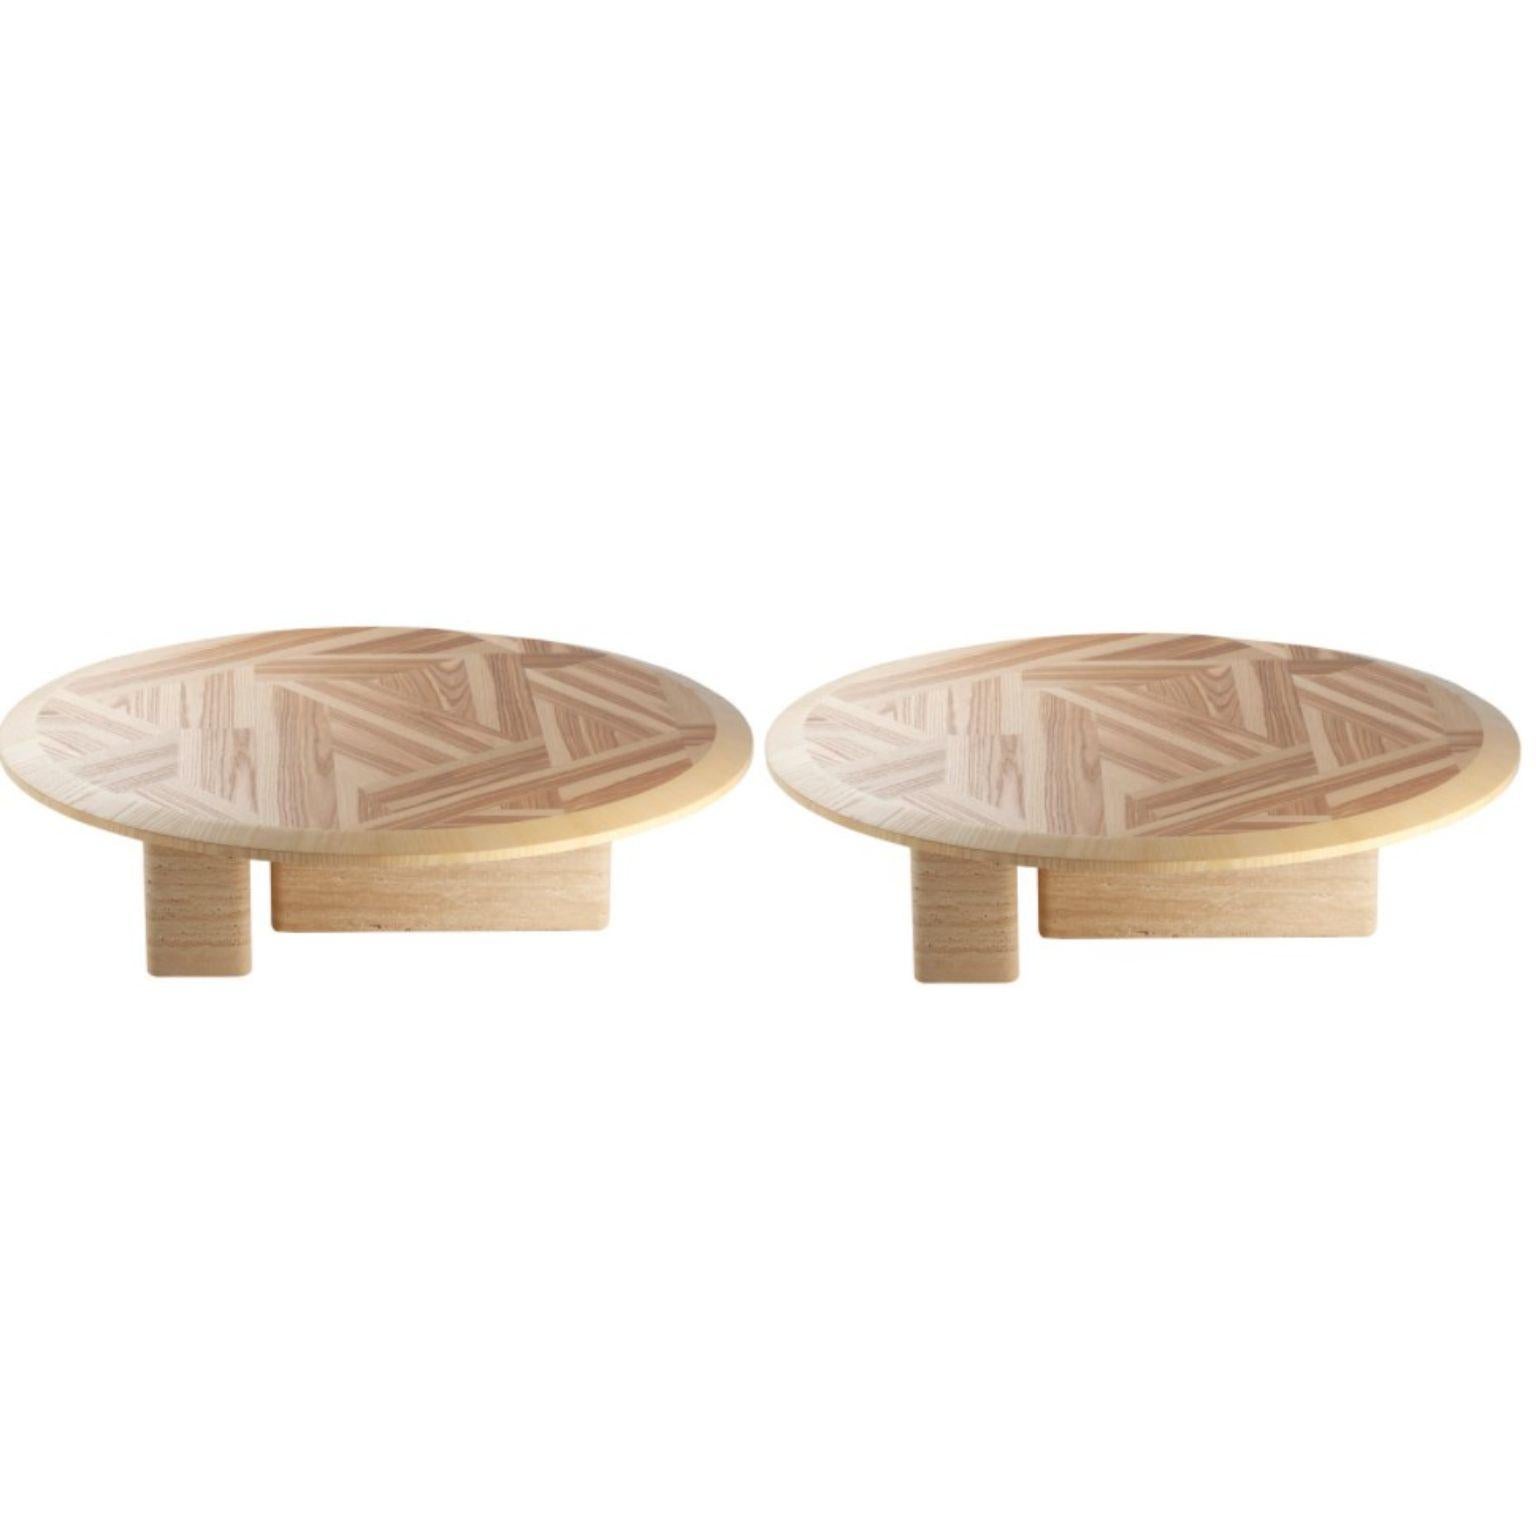 Set of 2 L’anamour center tables by Dooq
Dimensions: D 110 x W 110 x H 30 cm
Materials: 
Top: Natural or nude olive ash
Base: Natural travertine or nude lacquered wood

Other options available.

L’anamour is a set of coffee and side tables, which